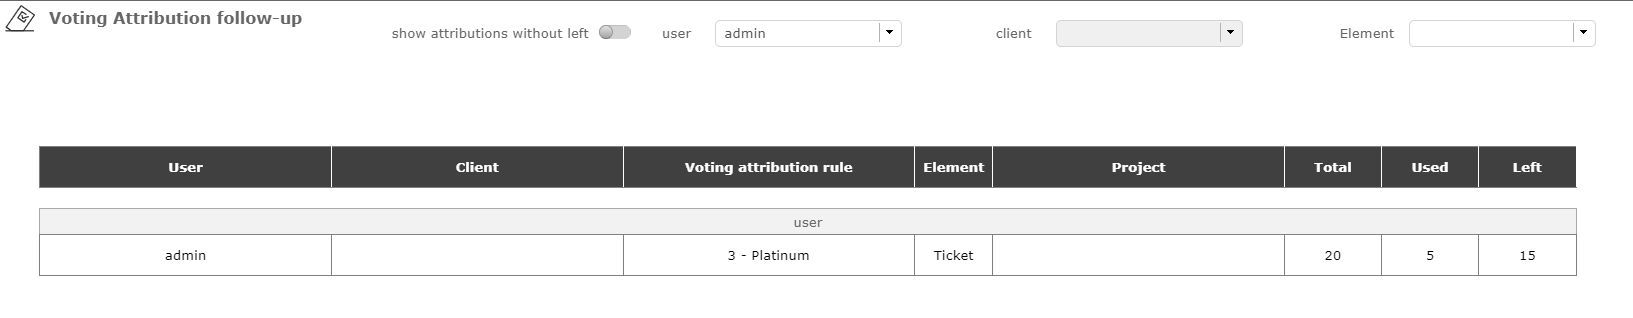 Voting attribution fllow-up screen